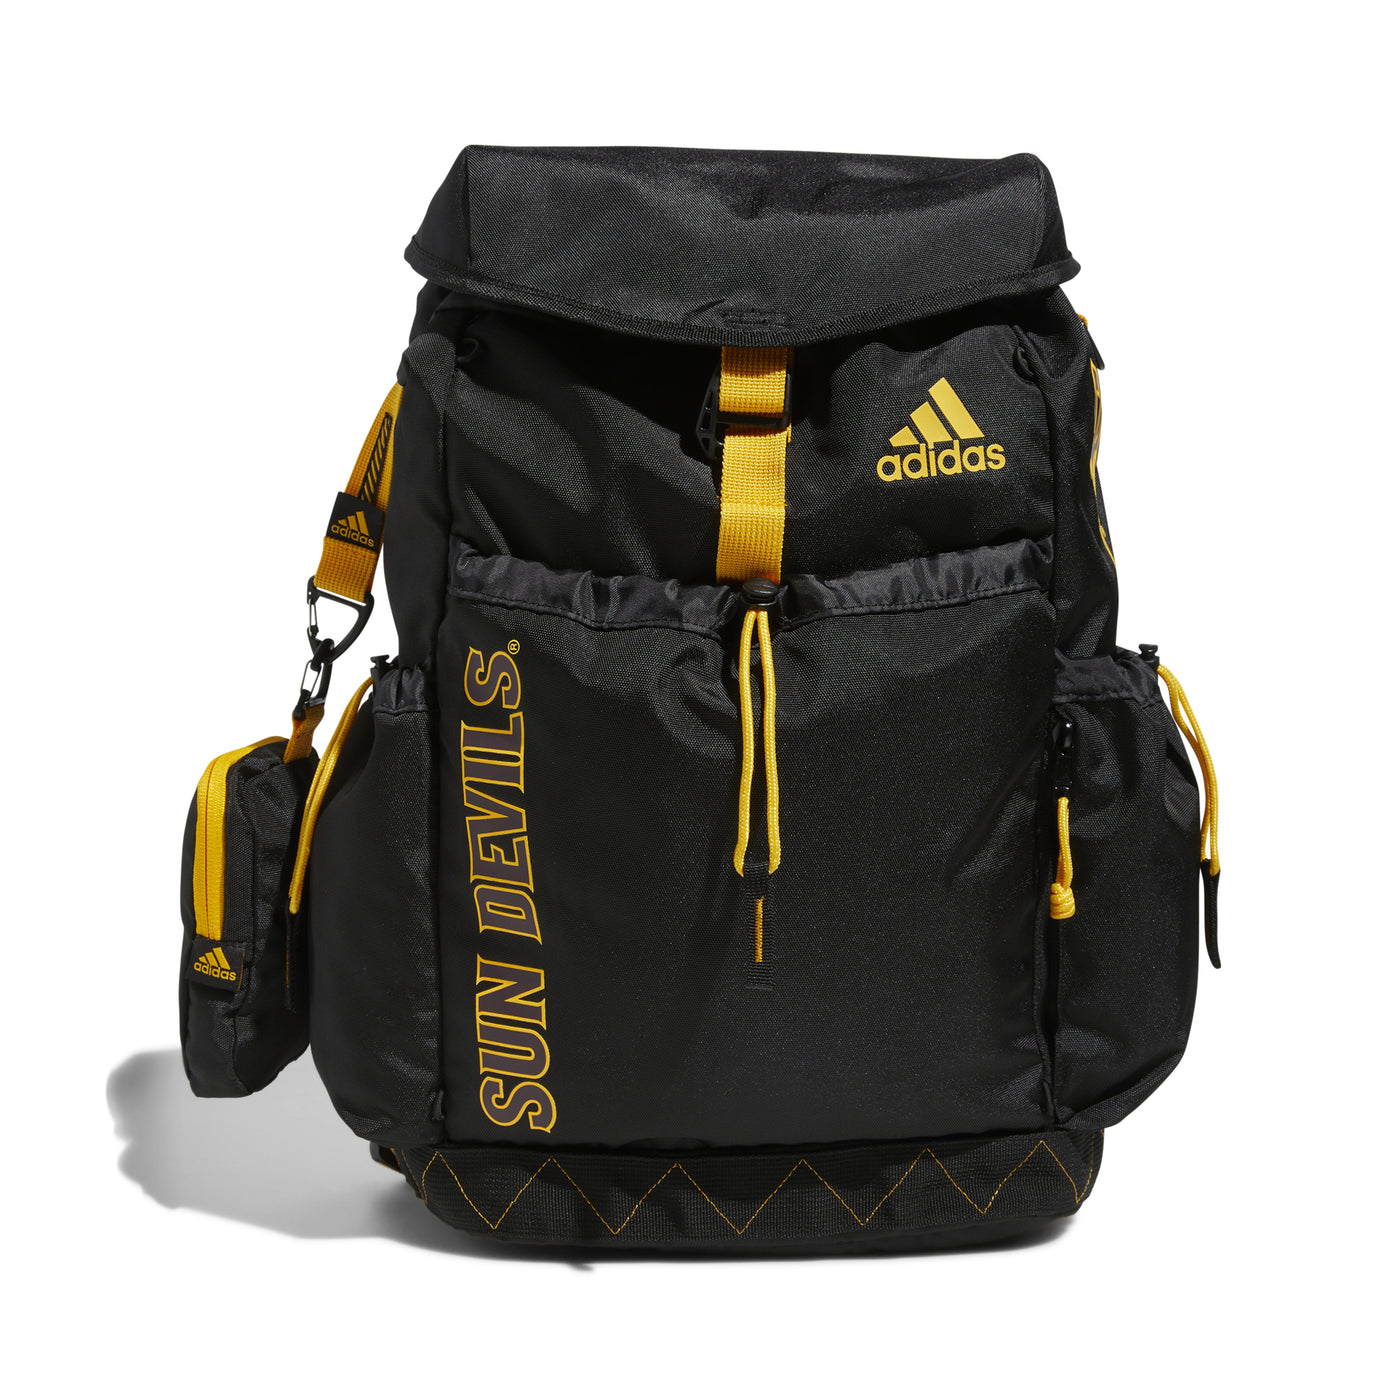 ASU Black backpack with yellow accents on the zipper-cords, straps, stitching. The Adidas logo and text are also in yellow. Sundevils is also outlined in yellow on the side side of the front pocket. 